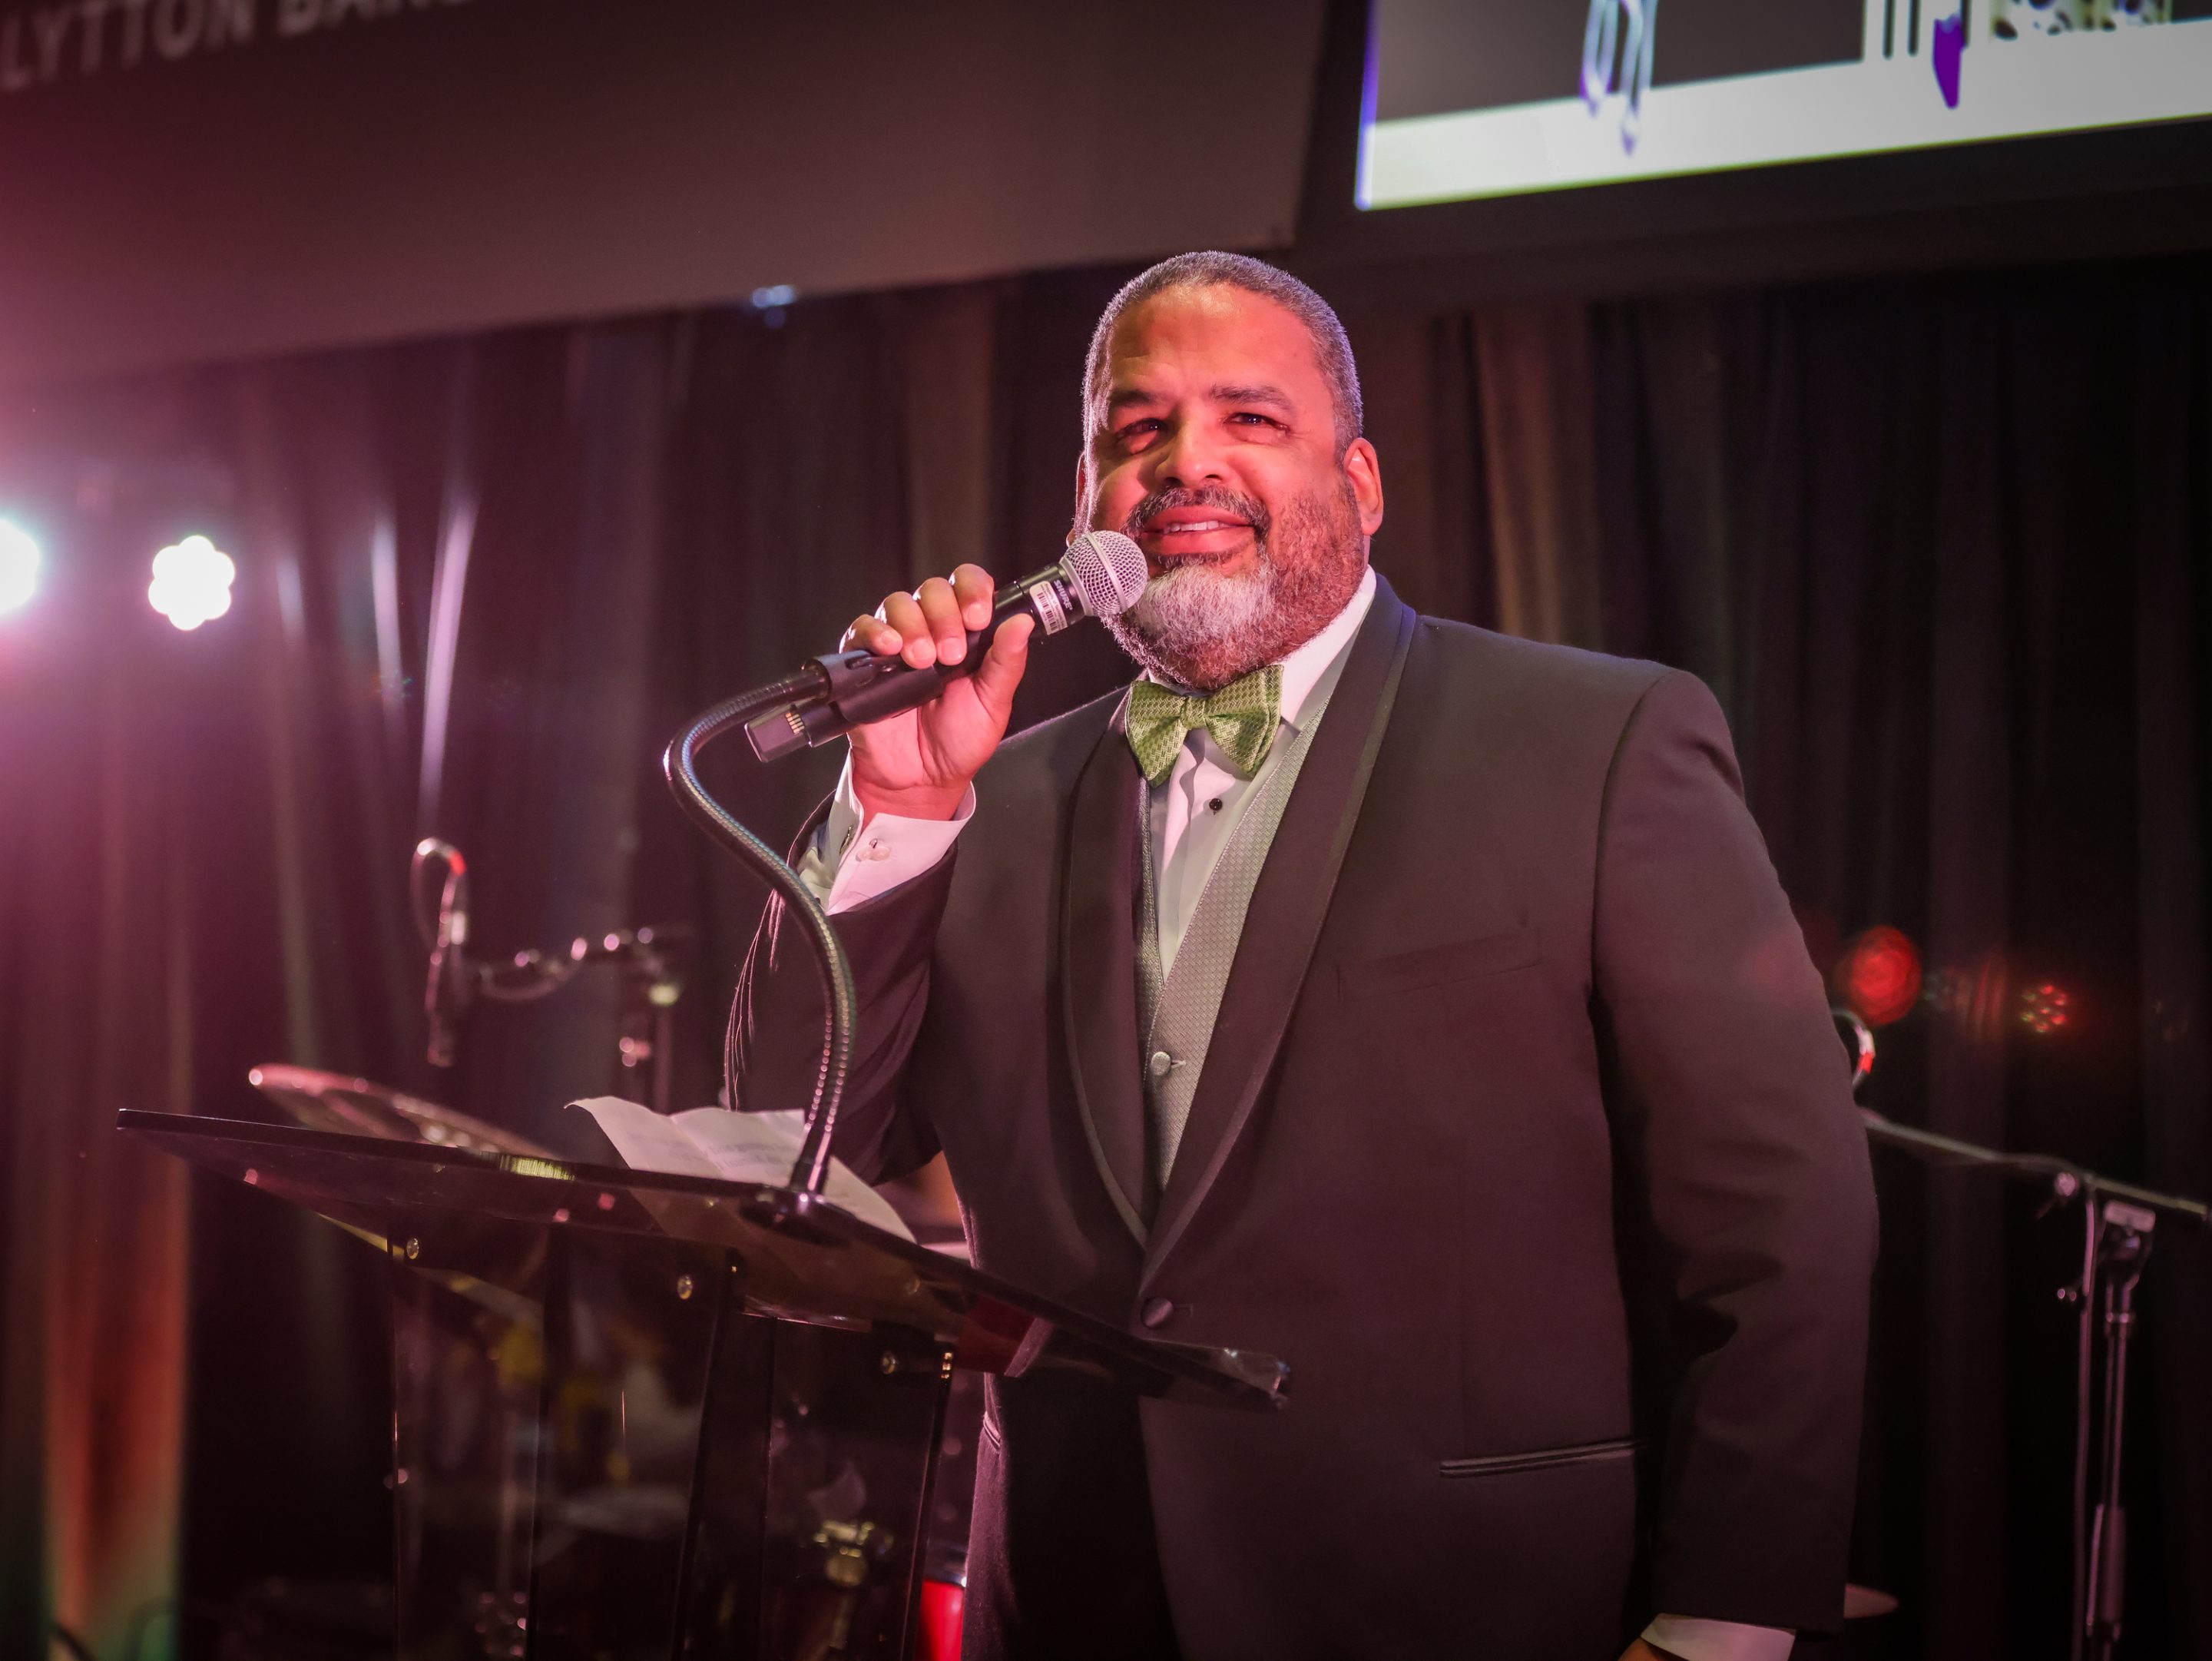 A man in a tuxedo singing into a microphone at The LIME Foundation fundraiser event in Santa Rosa.